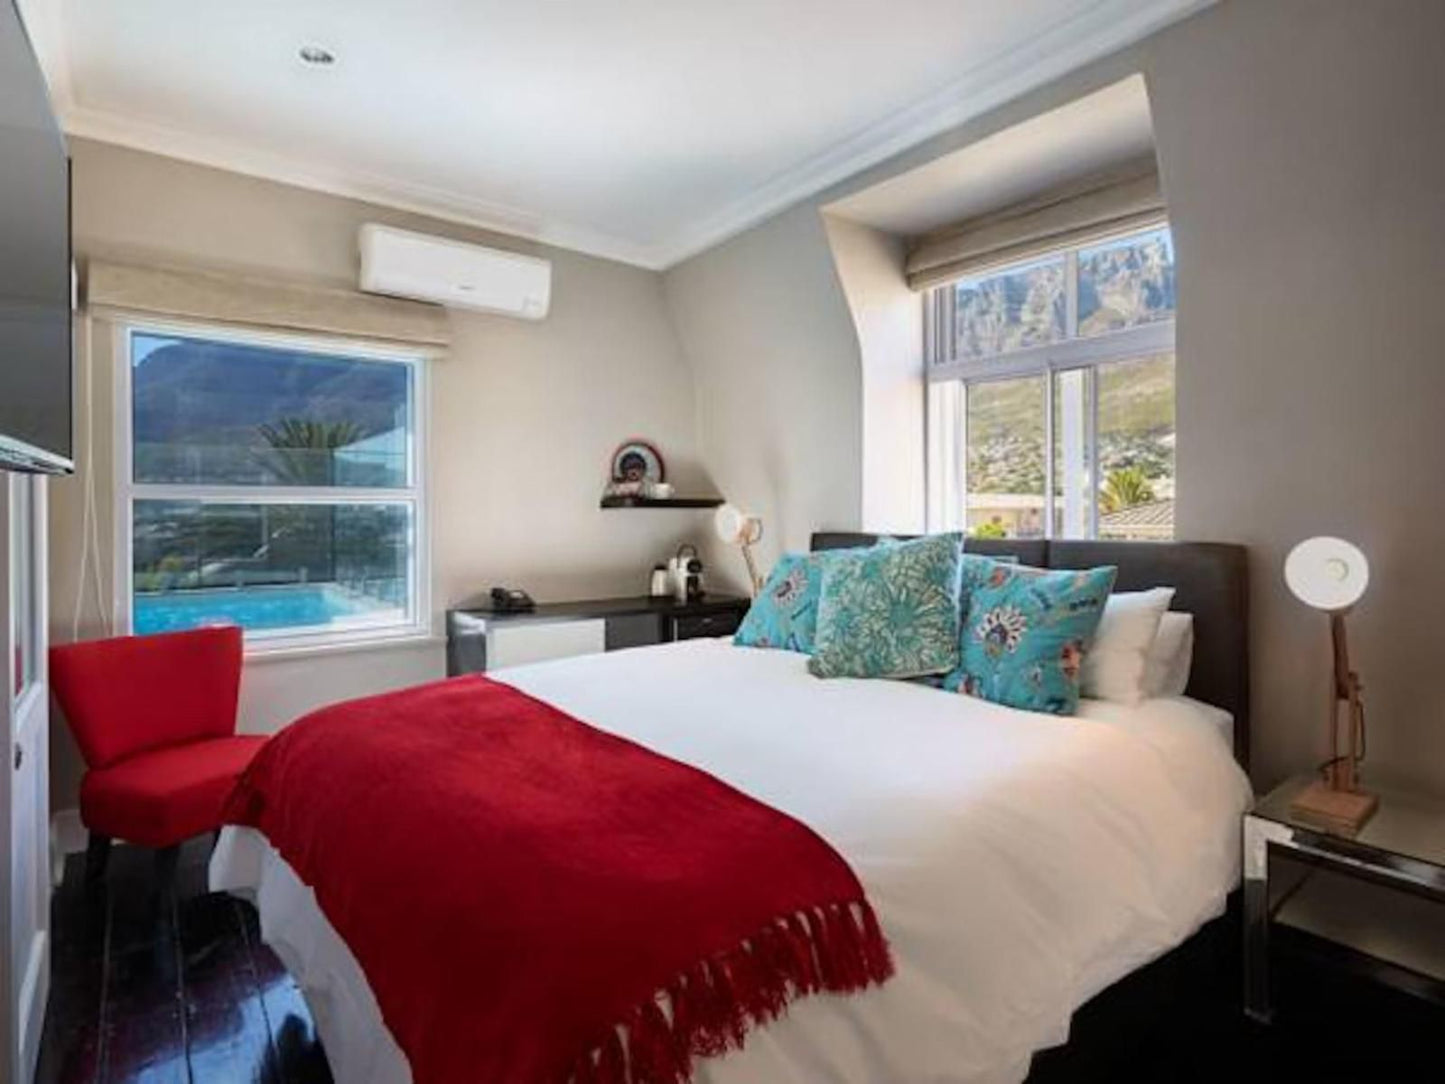 Cloud 9 Boutique Hotel And Spa Tamboerskloof Cape Town Western Cape South Africa Bedroom